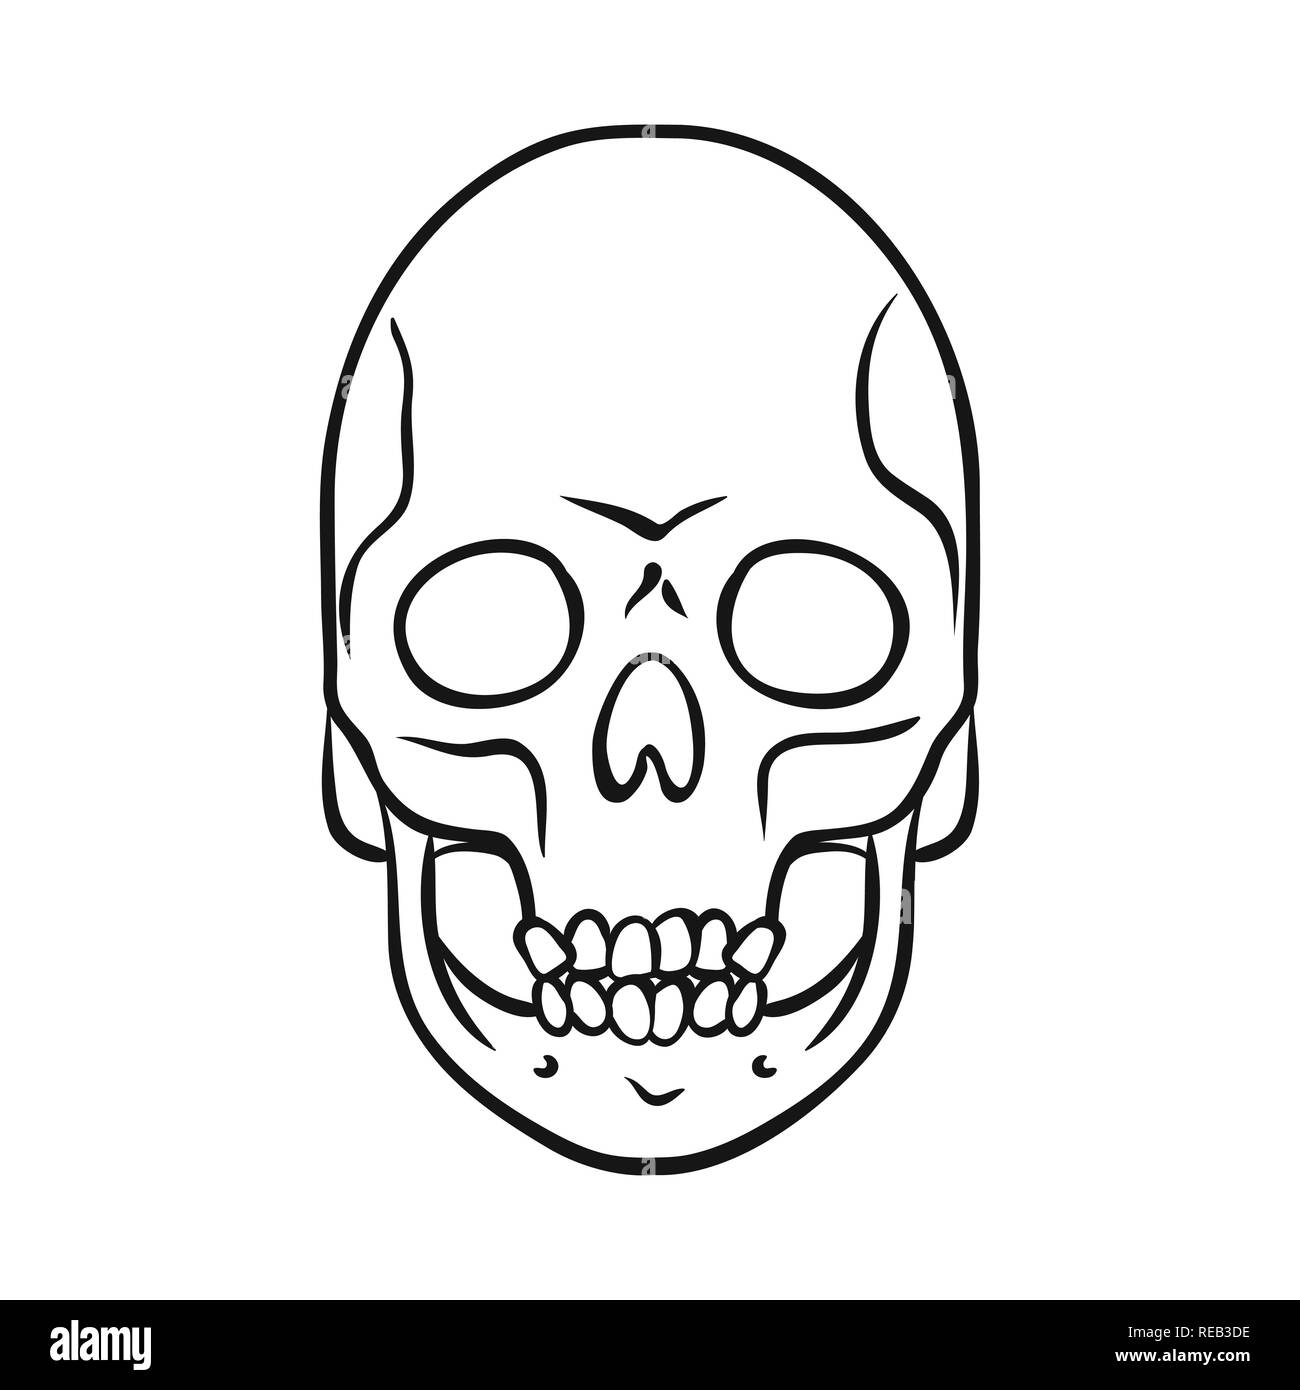 Skull Tattoo Meanings Everyone Faces It